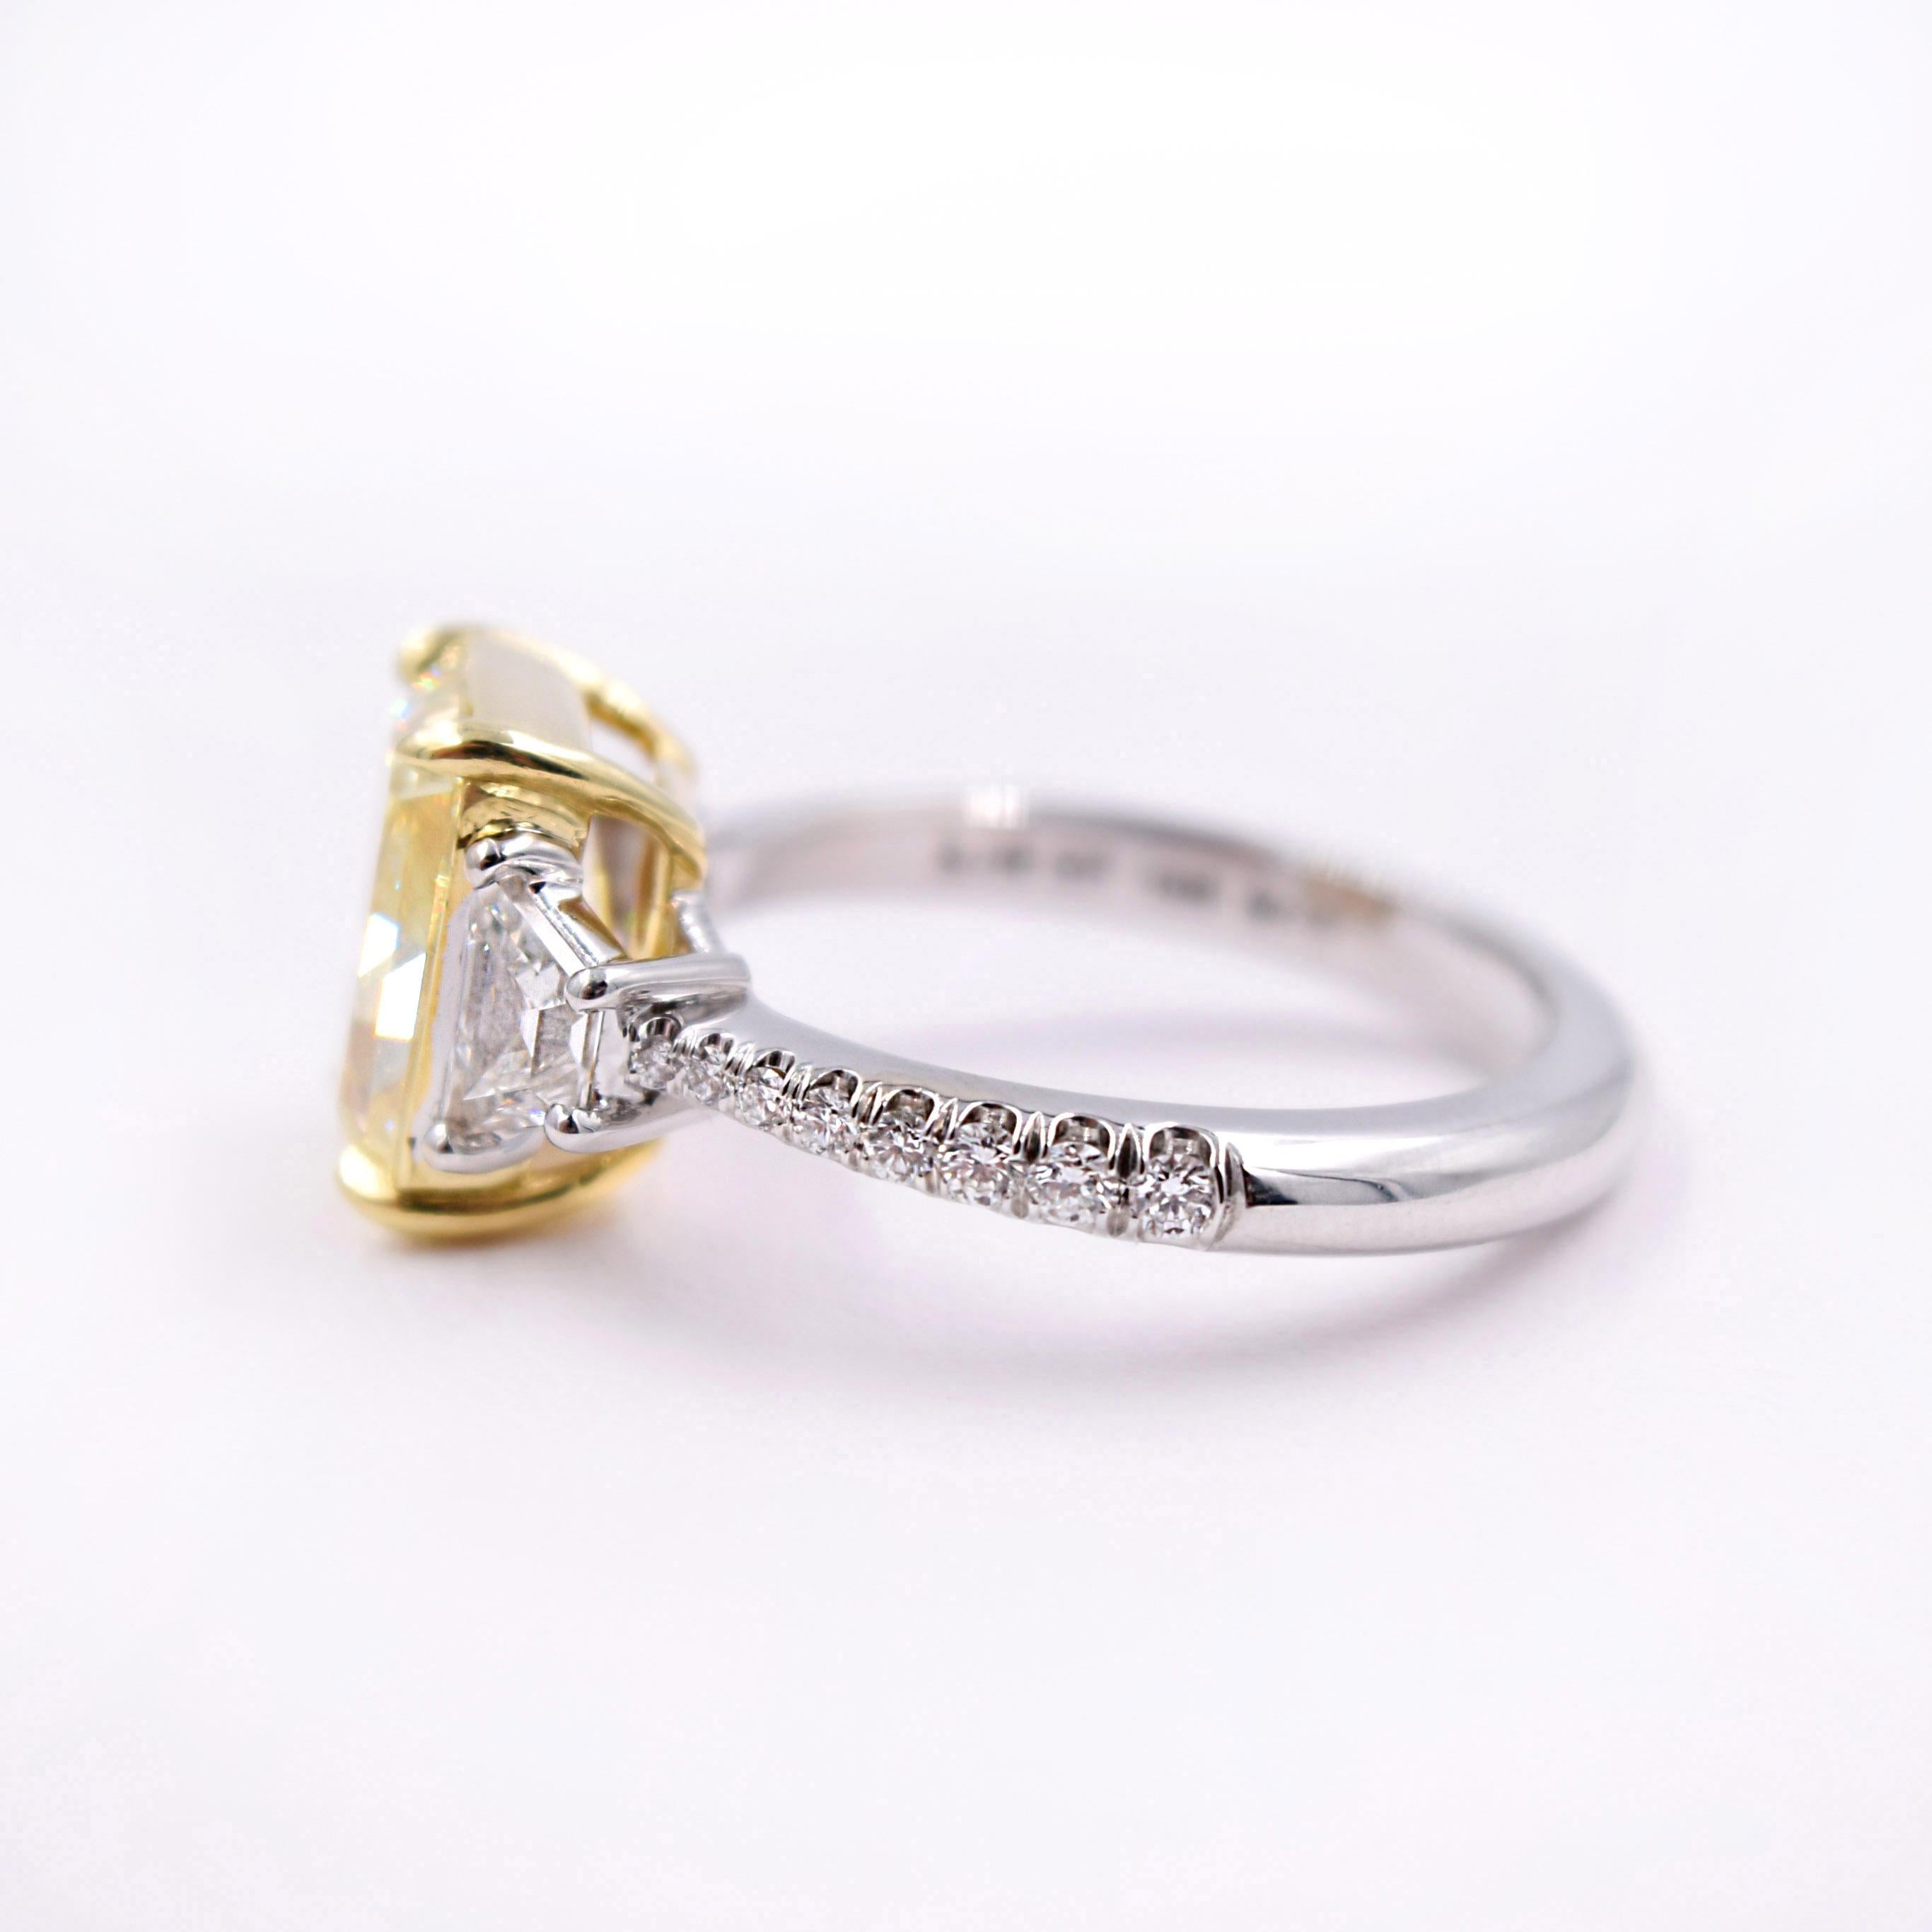 Novel Collection Diamond Ring:
GIA certified #1182709866
18K White and Yellow Gold, 4.82 grams
Radiant cut fancy yellow center diamond VVS1 clarity 3.15cts
2 Trapezoid cut white diamonds F color VS clarity 0.58cts
16 brilliant cut white diamonds